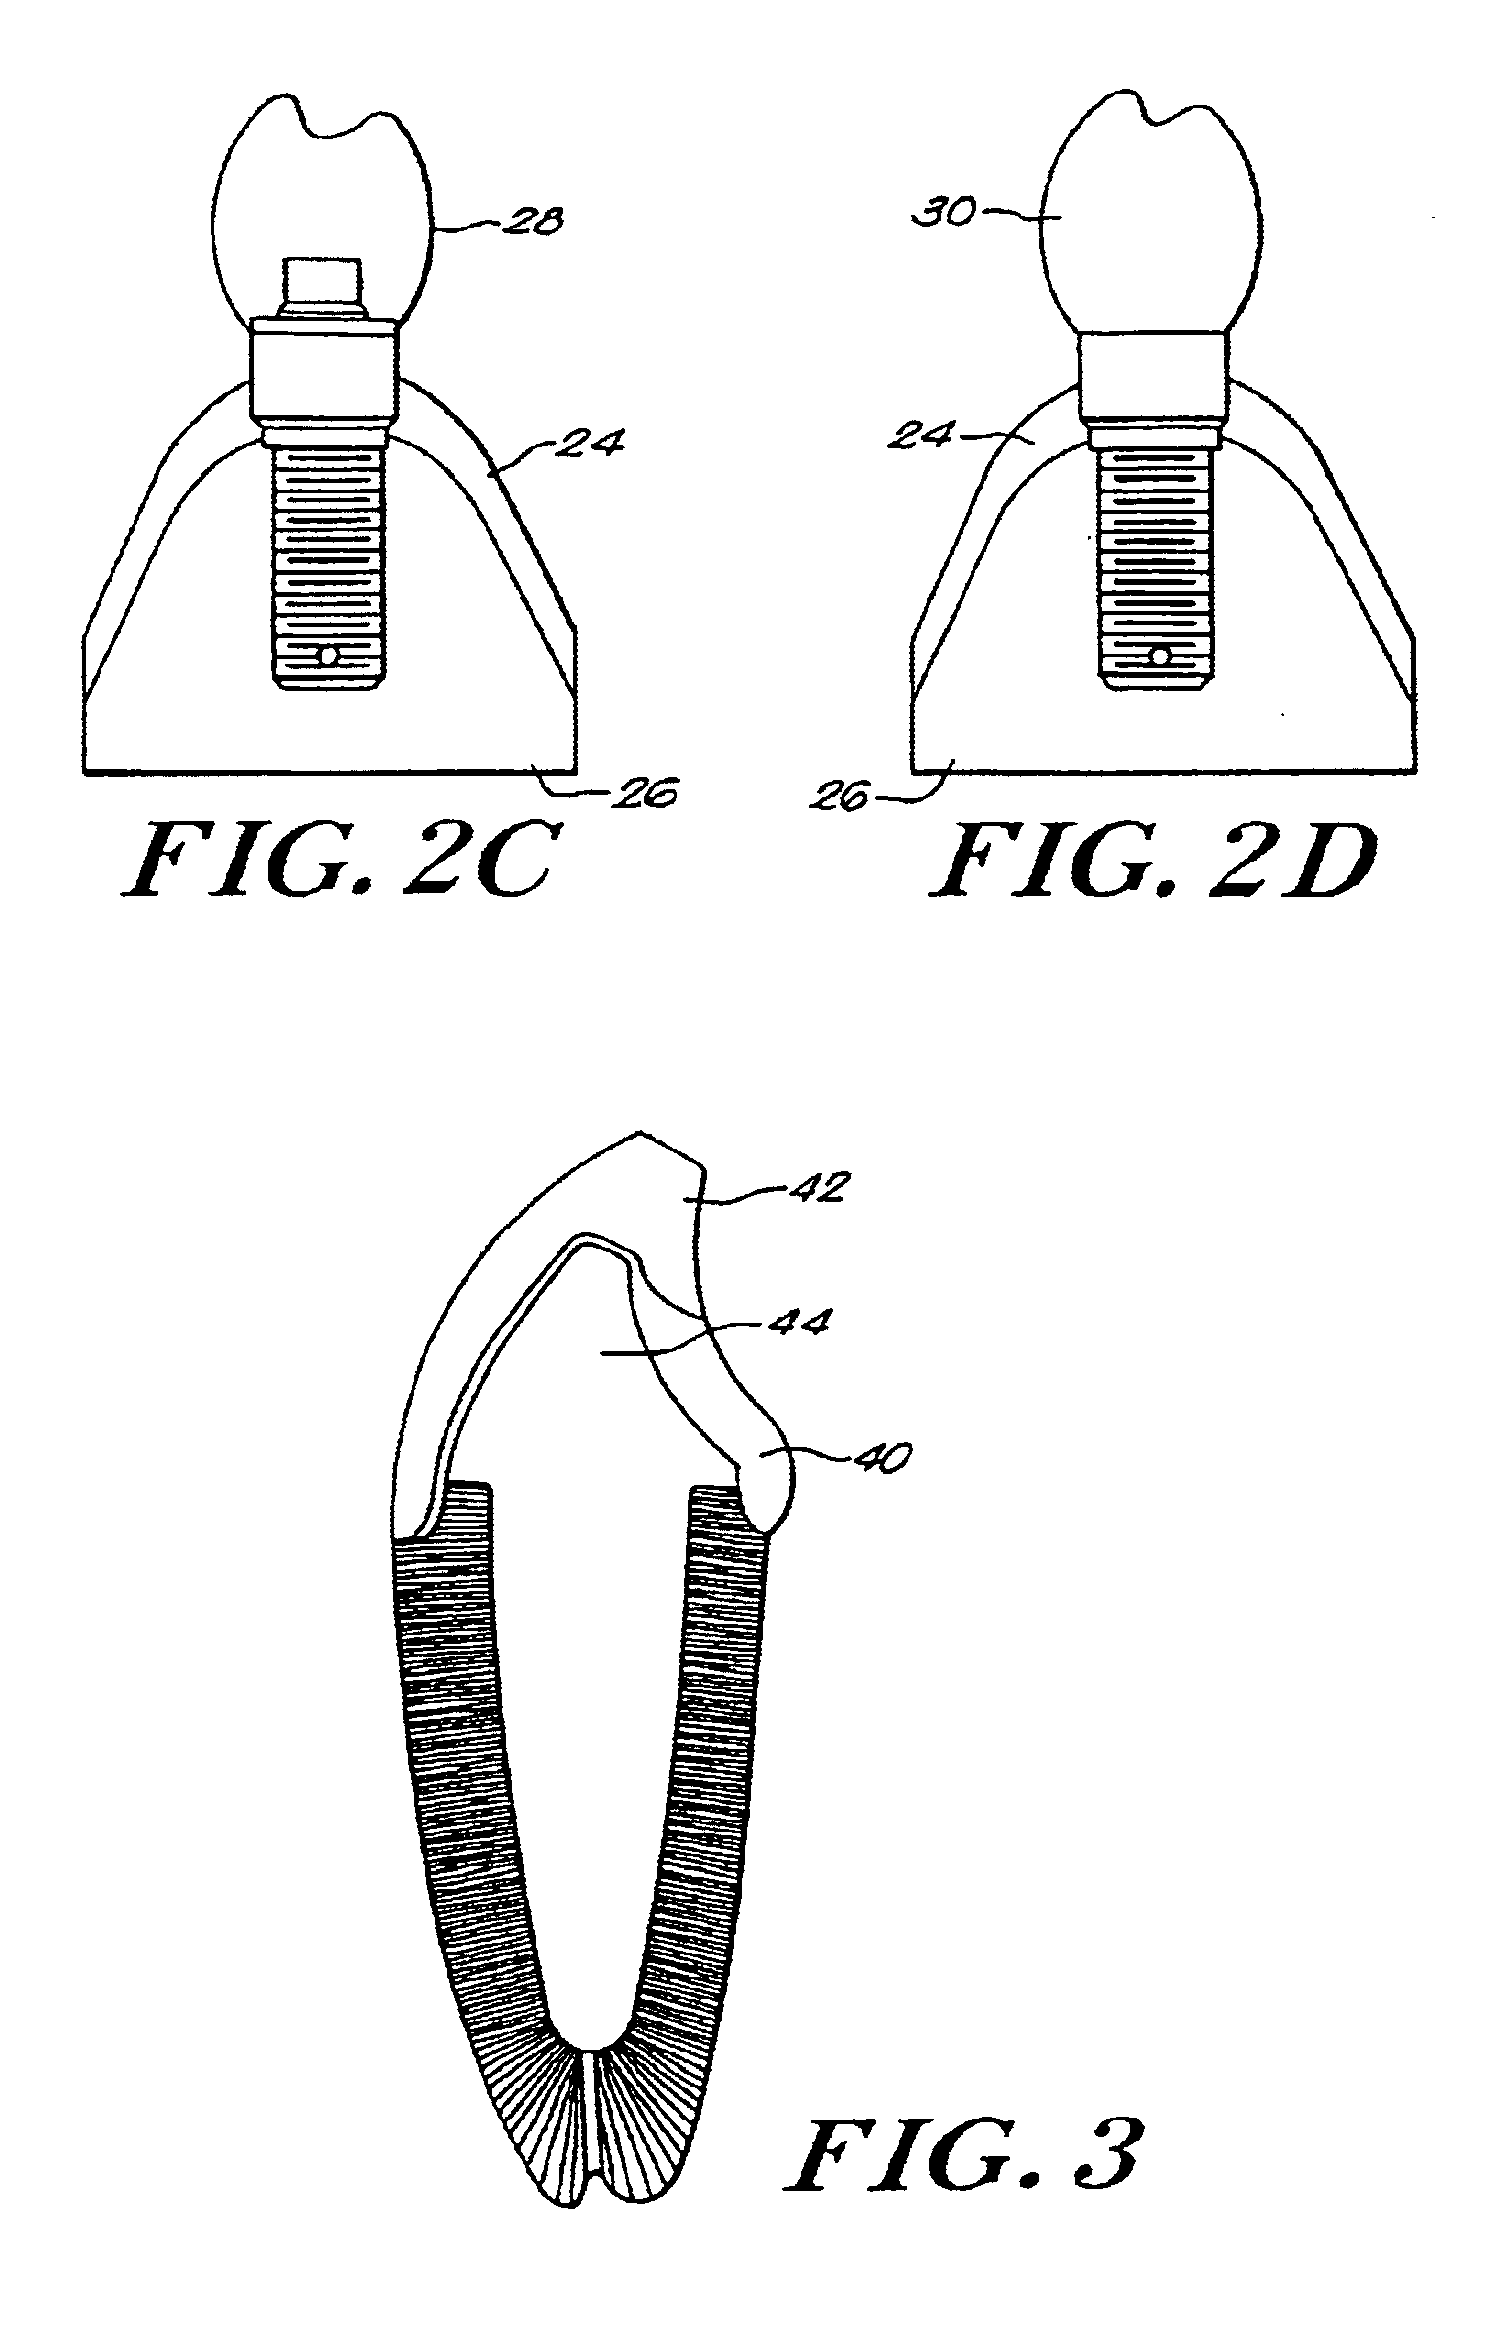 Method for fabricating endodontic, orthodontic, and direct restorations having infused ceramic network